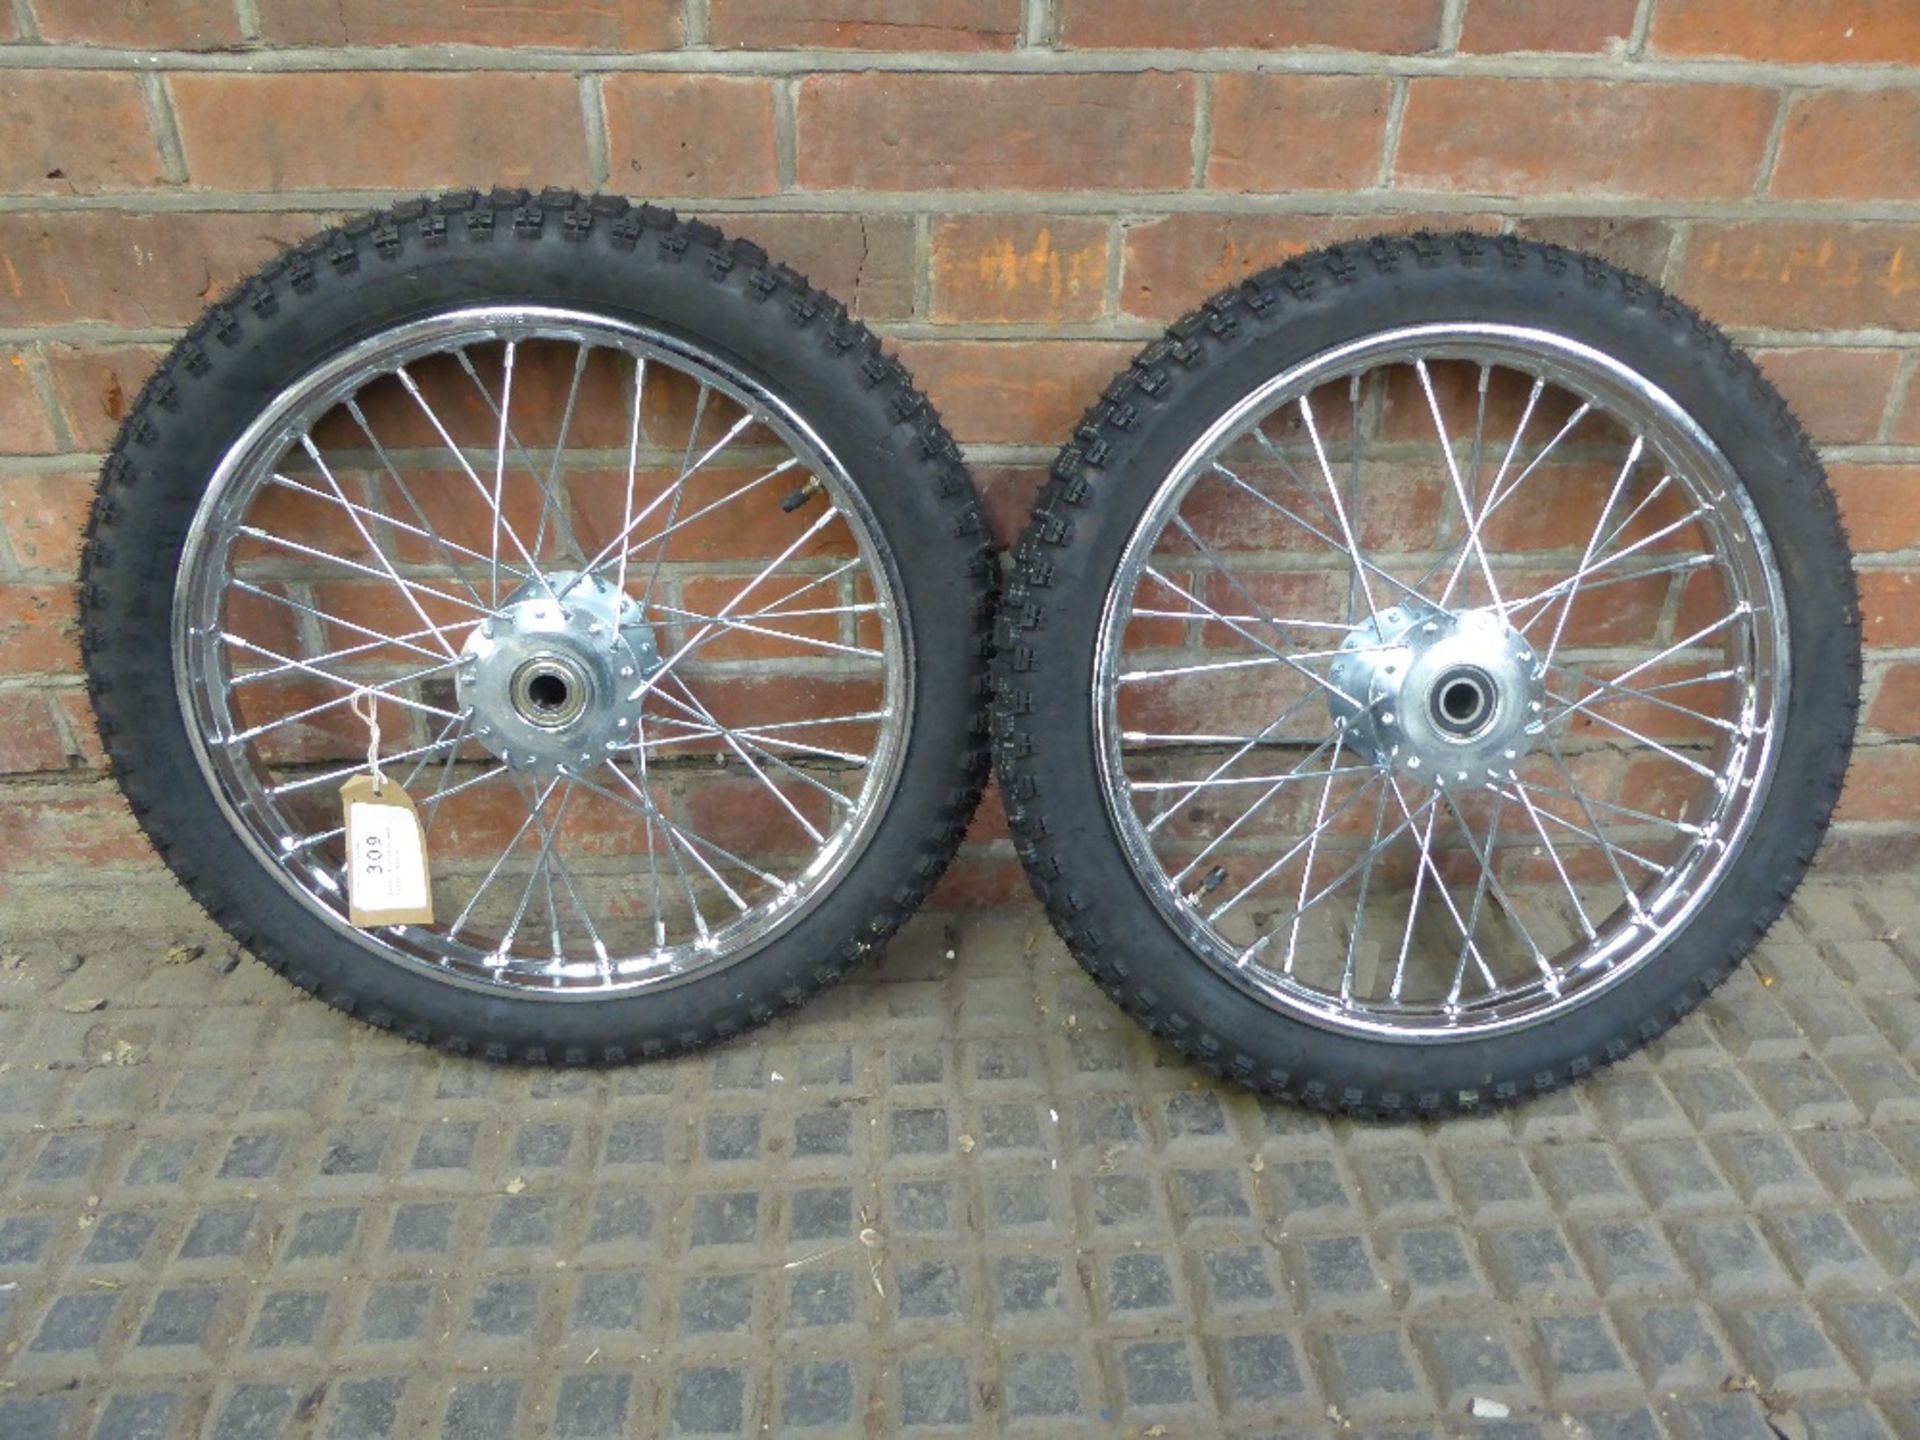 Pair of wheels and tyres, 16ins - carries VAT